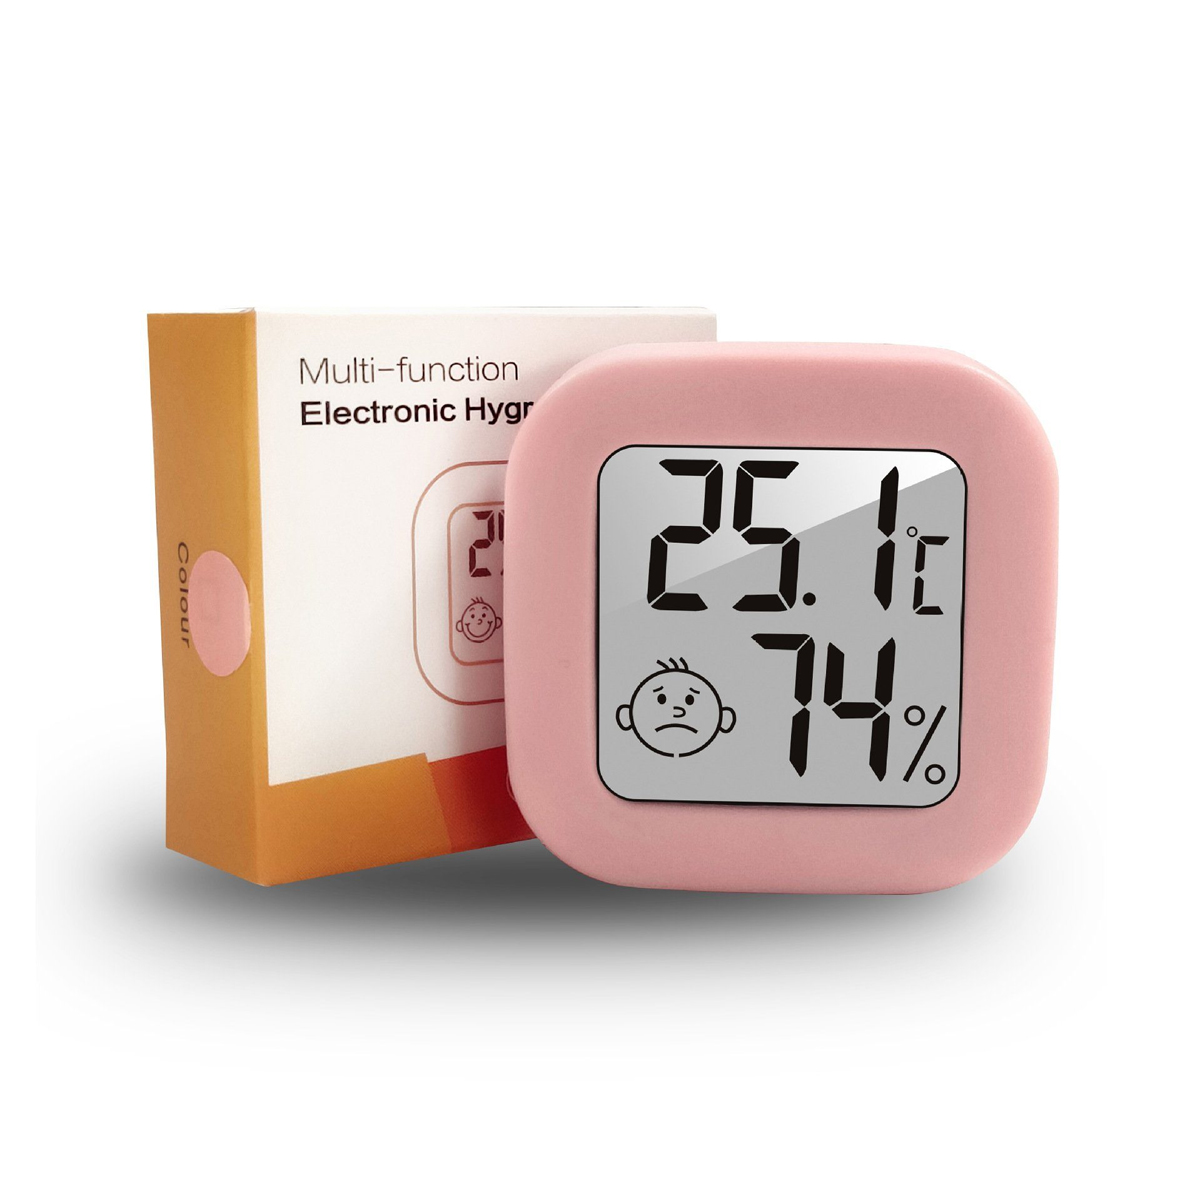 BABY JA Raumthermometer Digital Mini Connect Smiley-Gesicht mit Smart Hygrothermometer Thermometer/Hygrometer